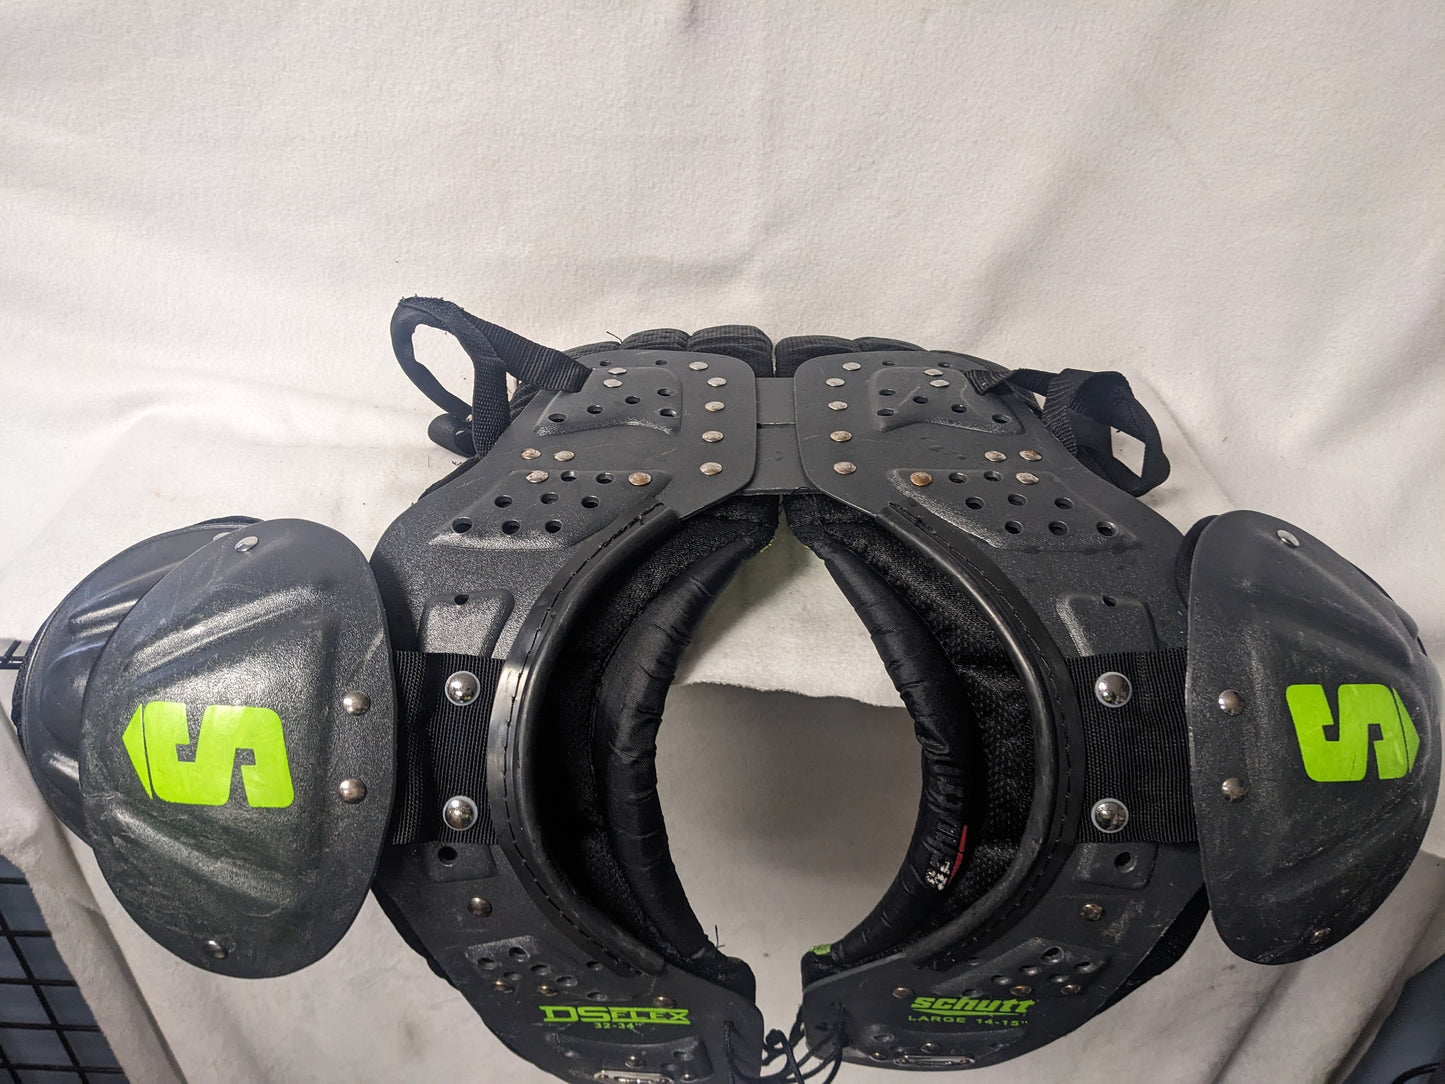 Schutt DSFlex Youth Football Shoulder Pads Size Youth Large Color Black Condition Used